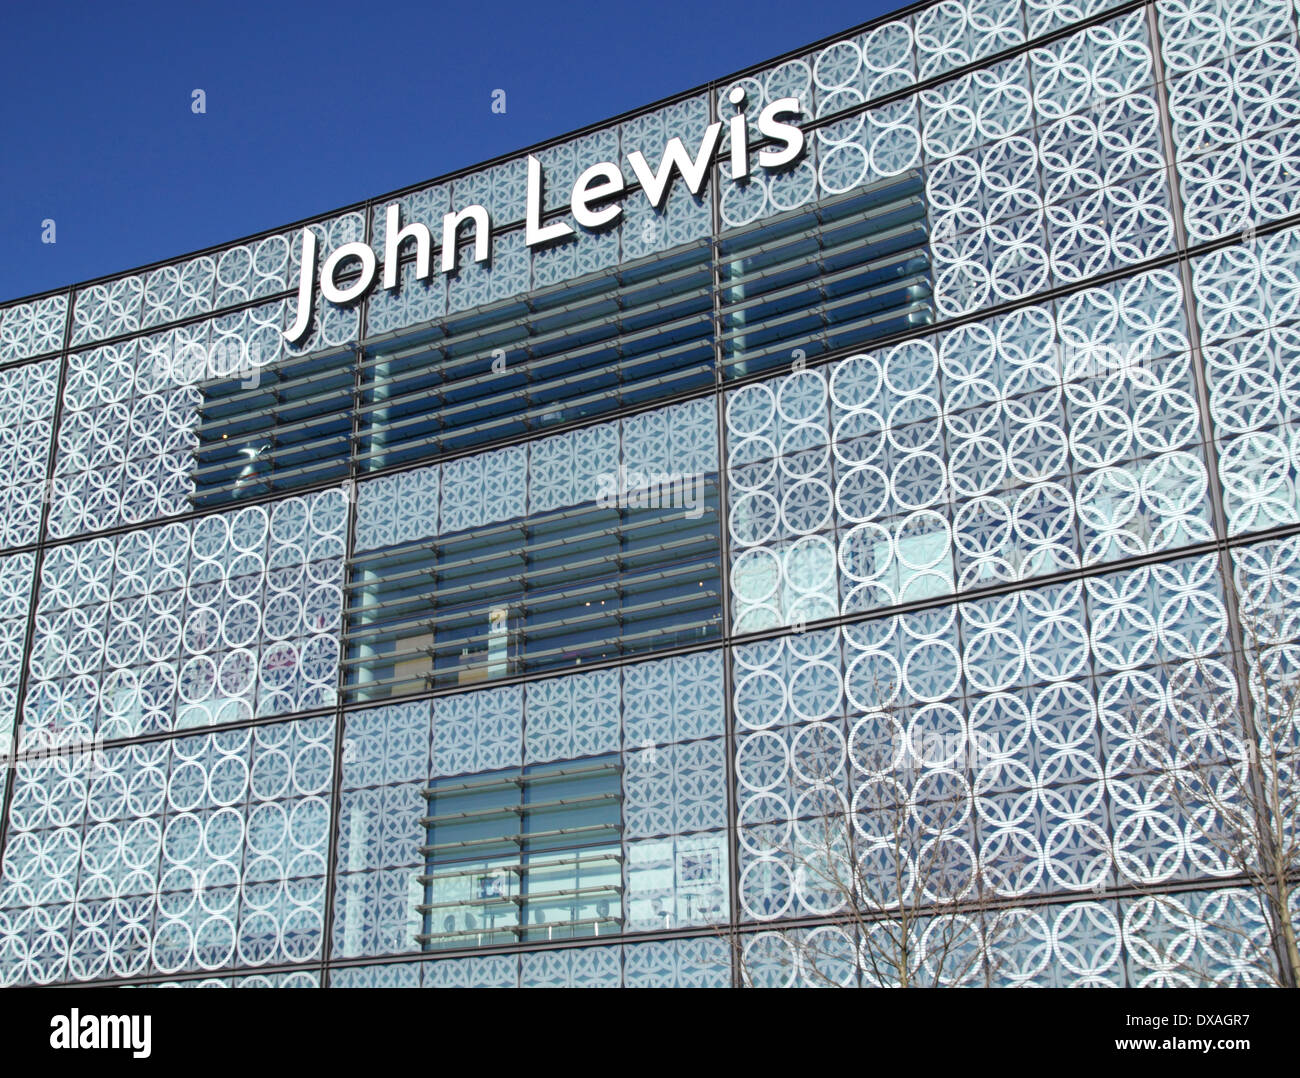 John Lewis Department Store at Westfield Shopping Centre Stratford London  Stock Photo - Alamy